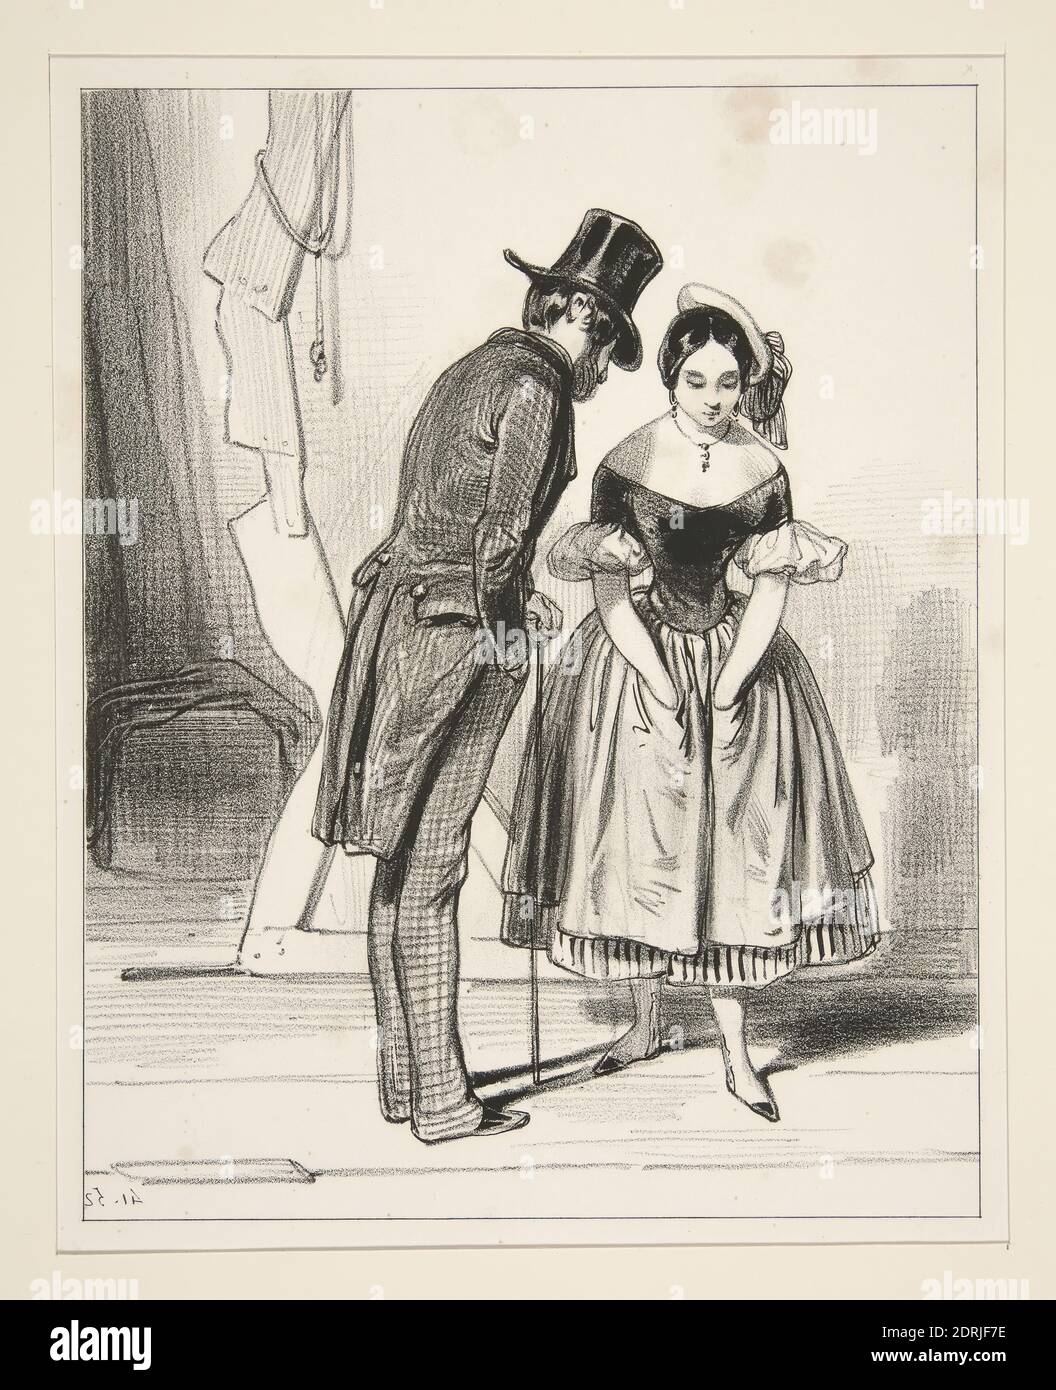 Artist: Paul Gavarni, French, 1804–1866, Madame Charmant…, Lithograph, French, 19th century, Works on Paper - Prints Stock Photo